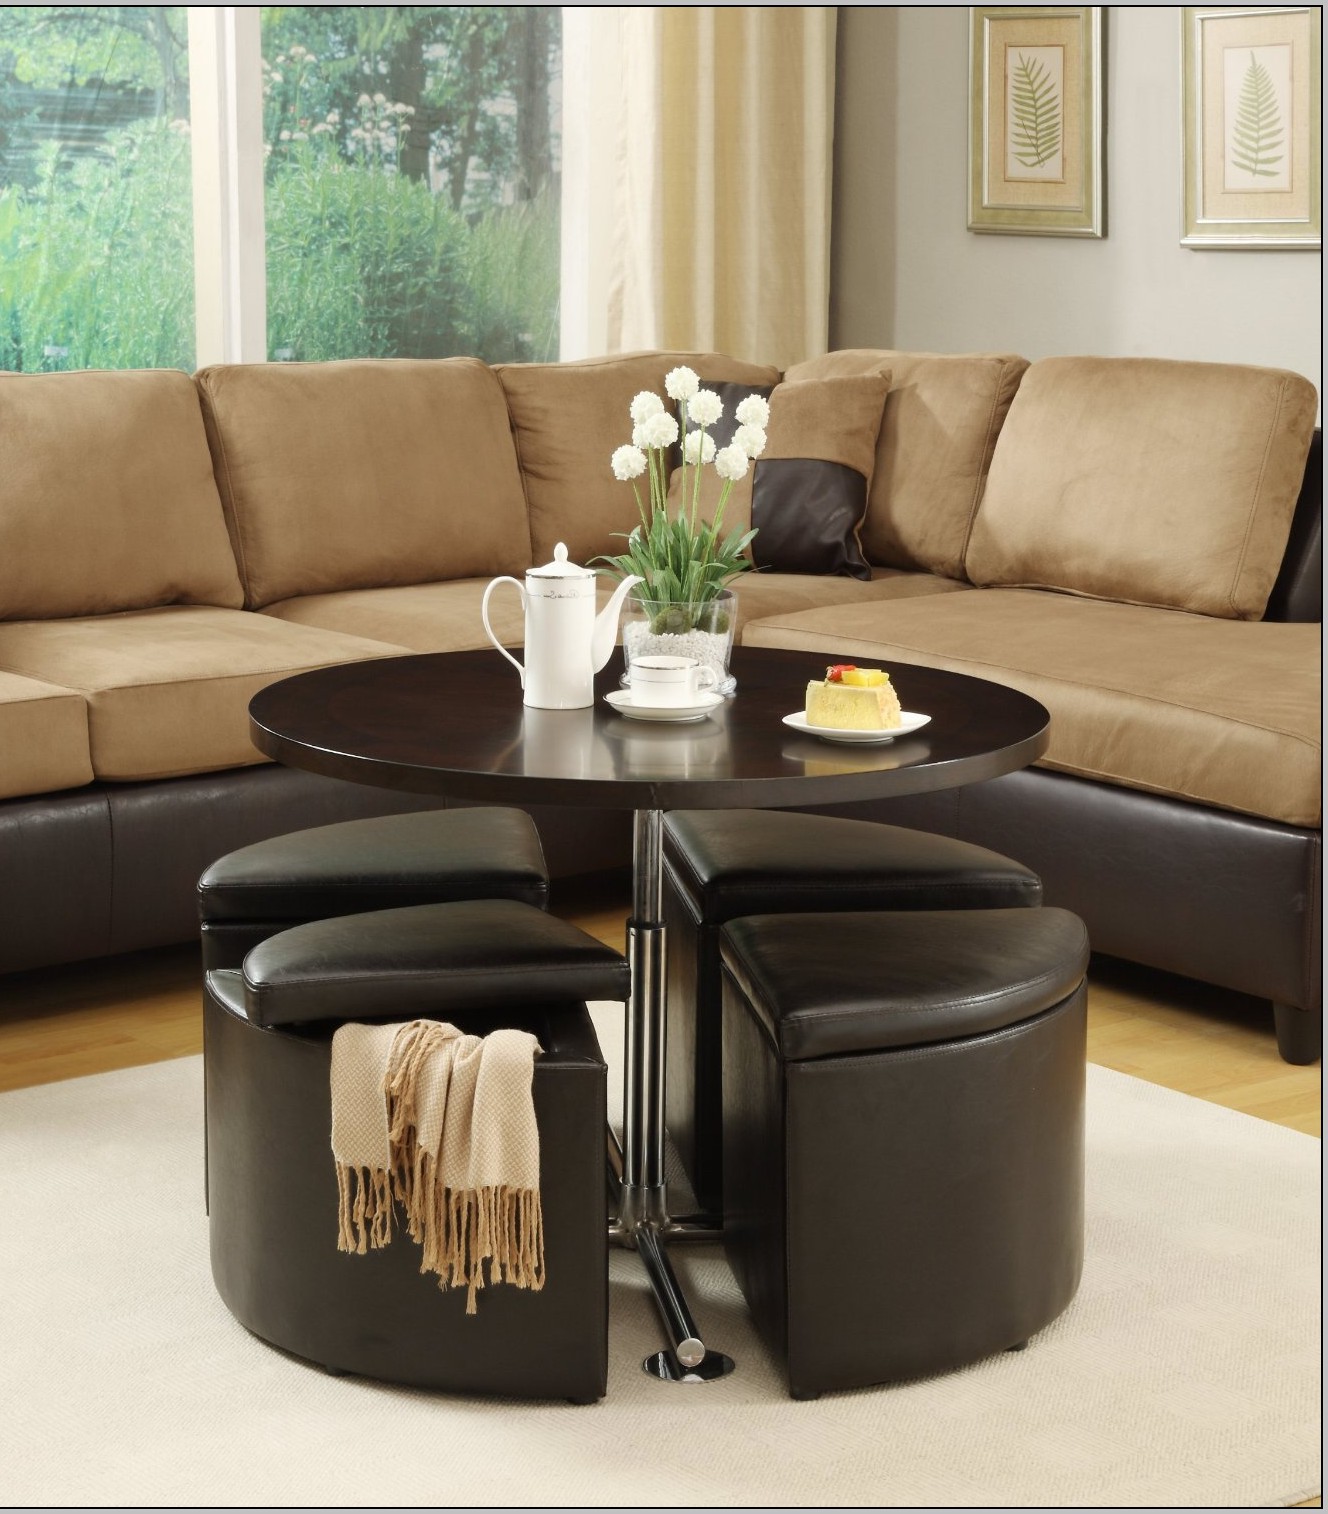 Round Coffee Table With Seats Underneath Roy Home Design